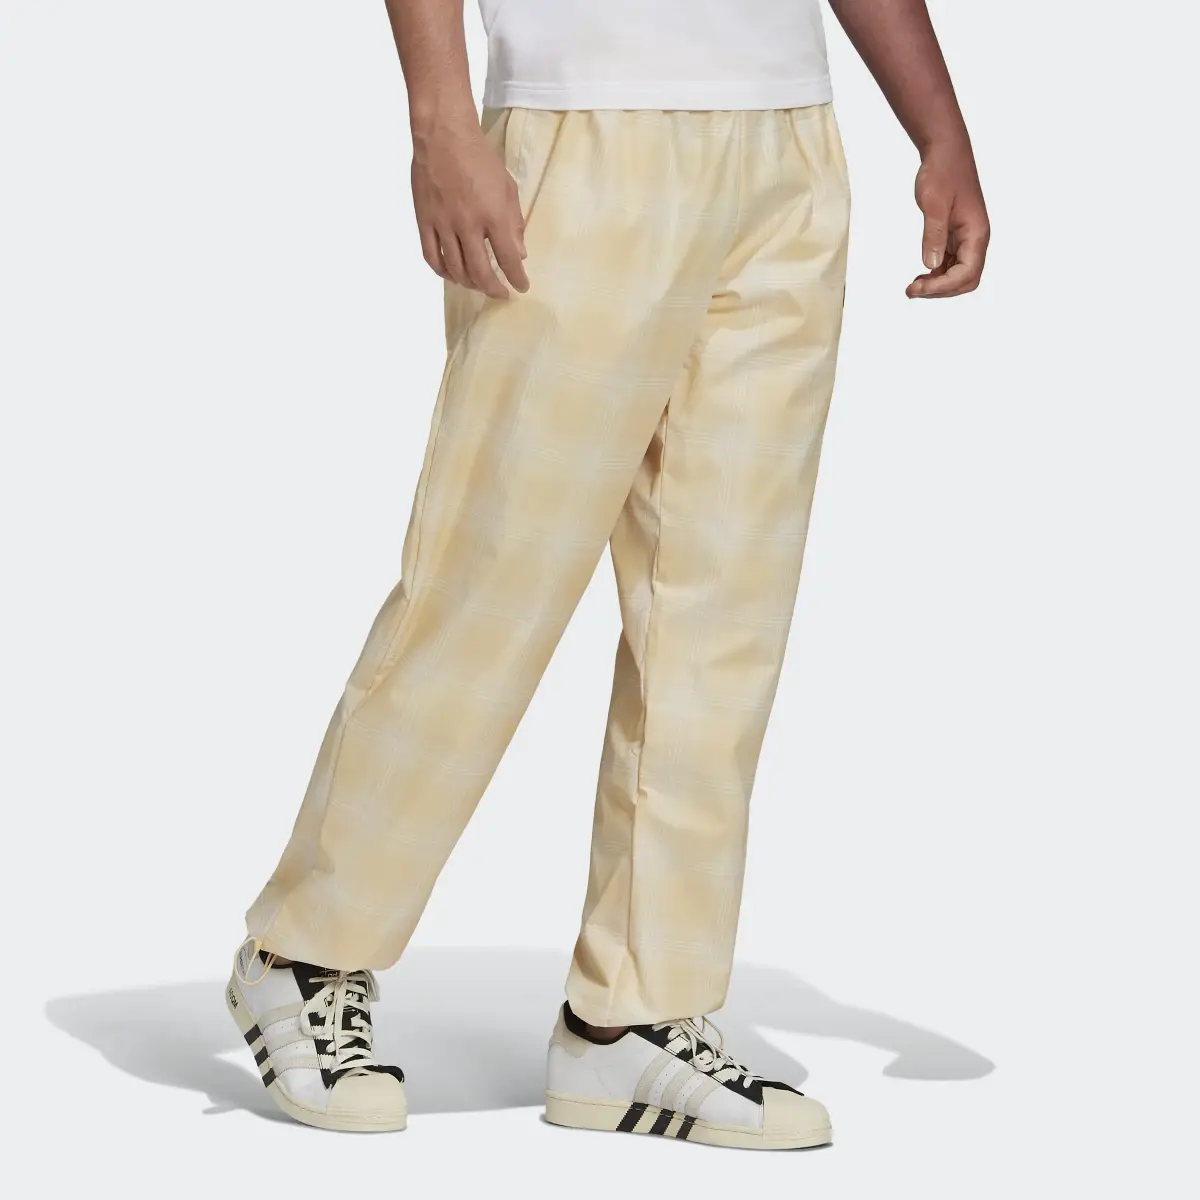 Adidas R.Y.V. Woven Tracksuit Bottoms. 3